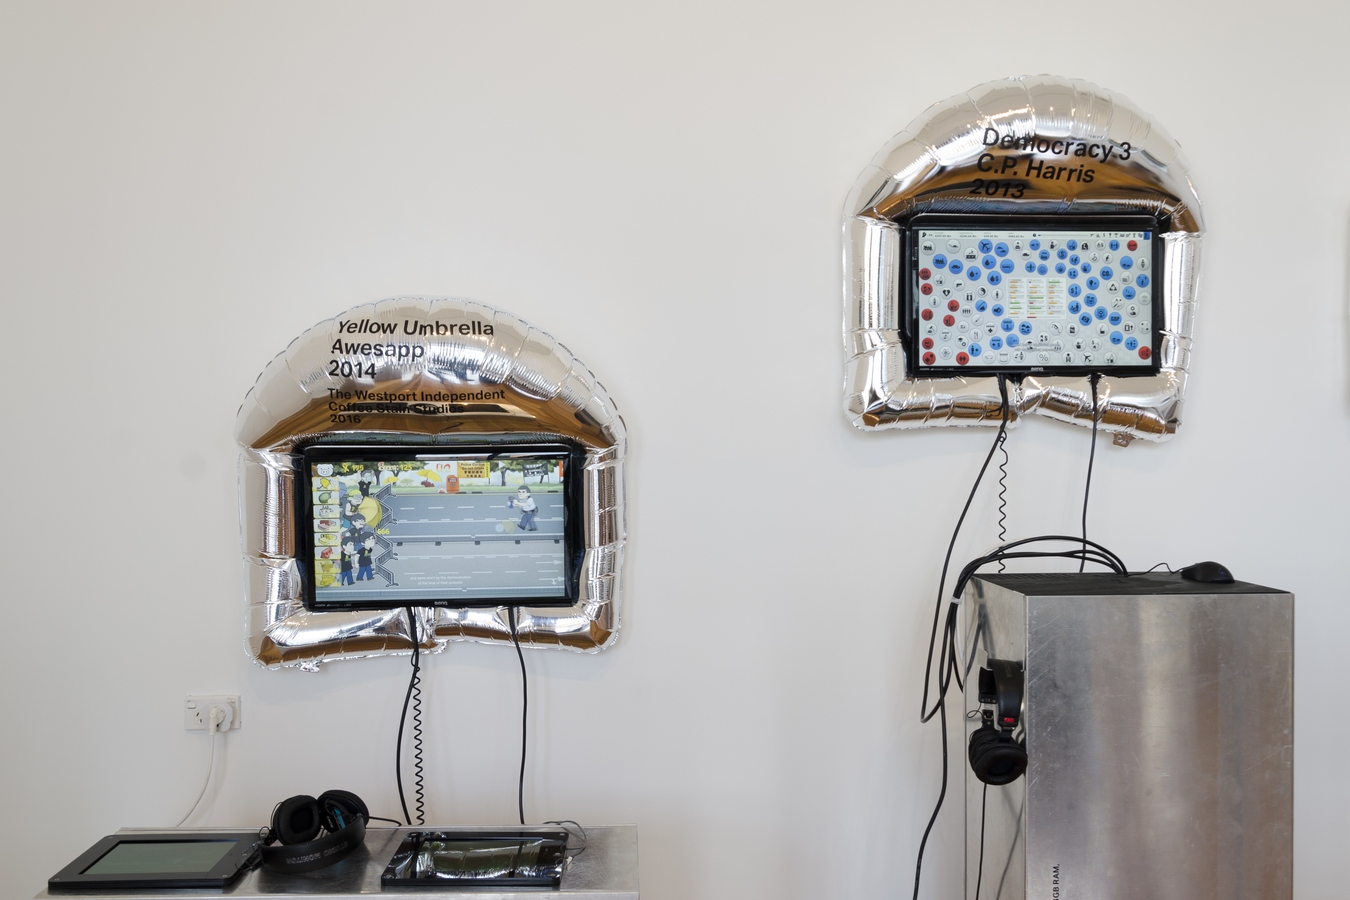 Games and Politics, installation view. Image: Mitchell Bright.